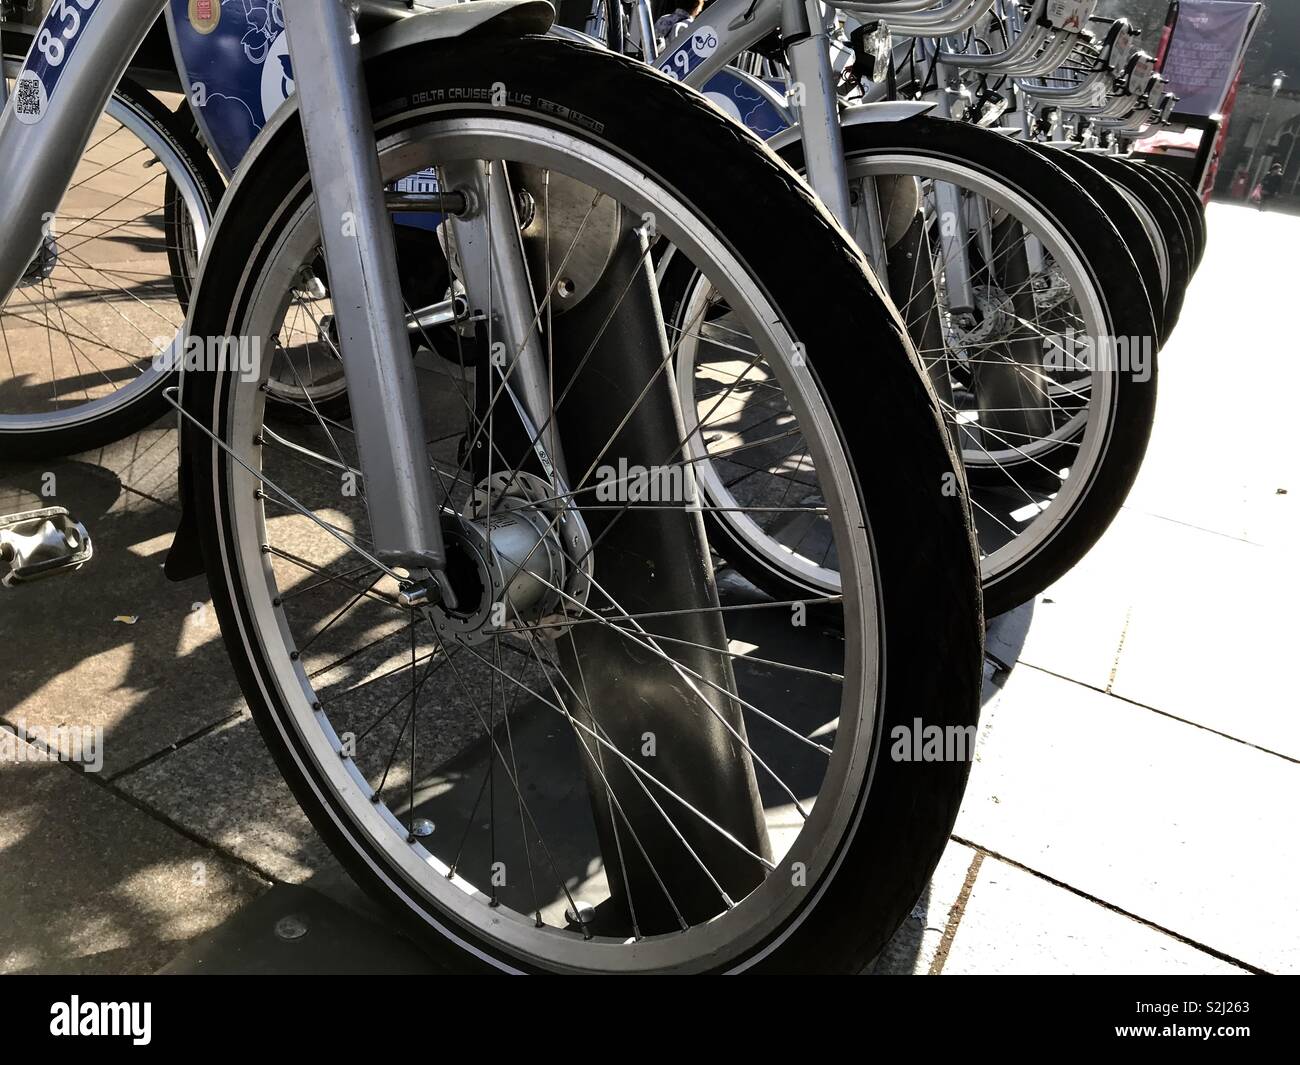 Bike/cycle rack with Next Bikes for hire in a city. Stock Photo